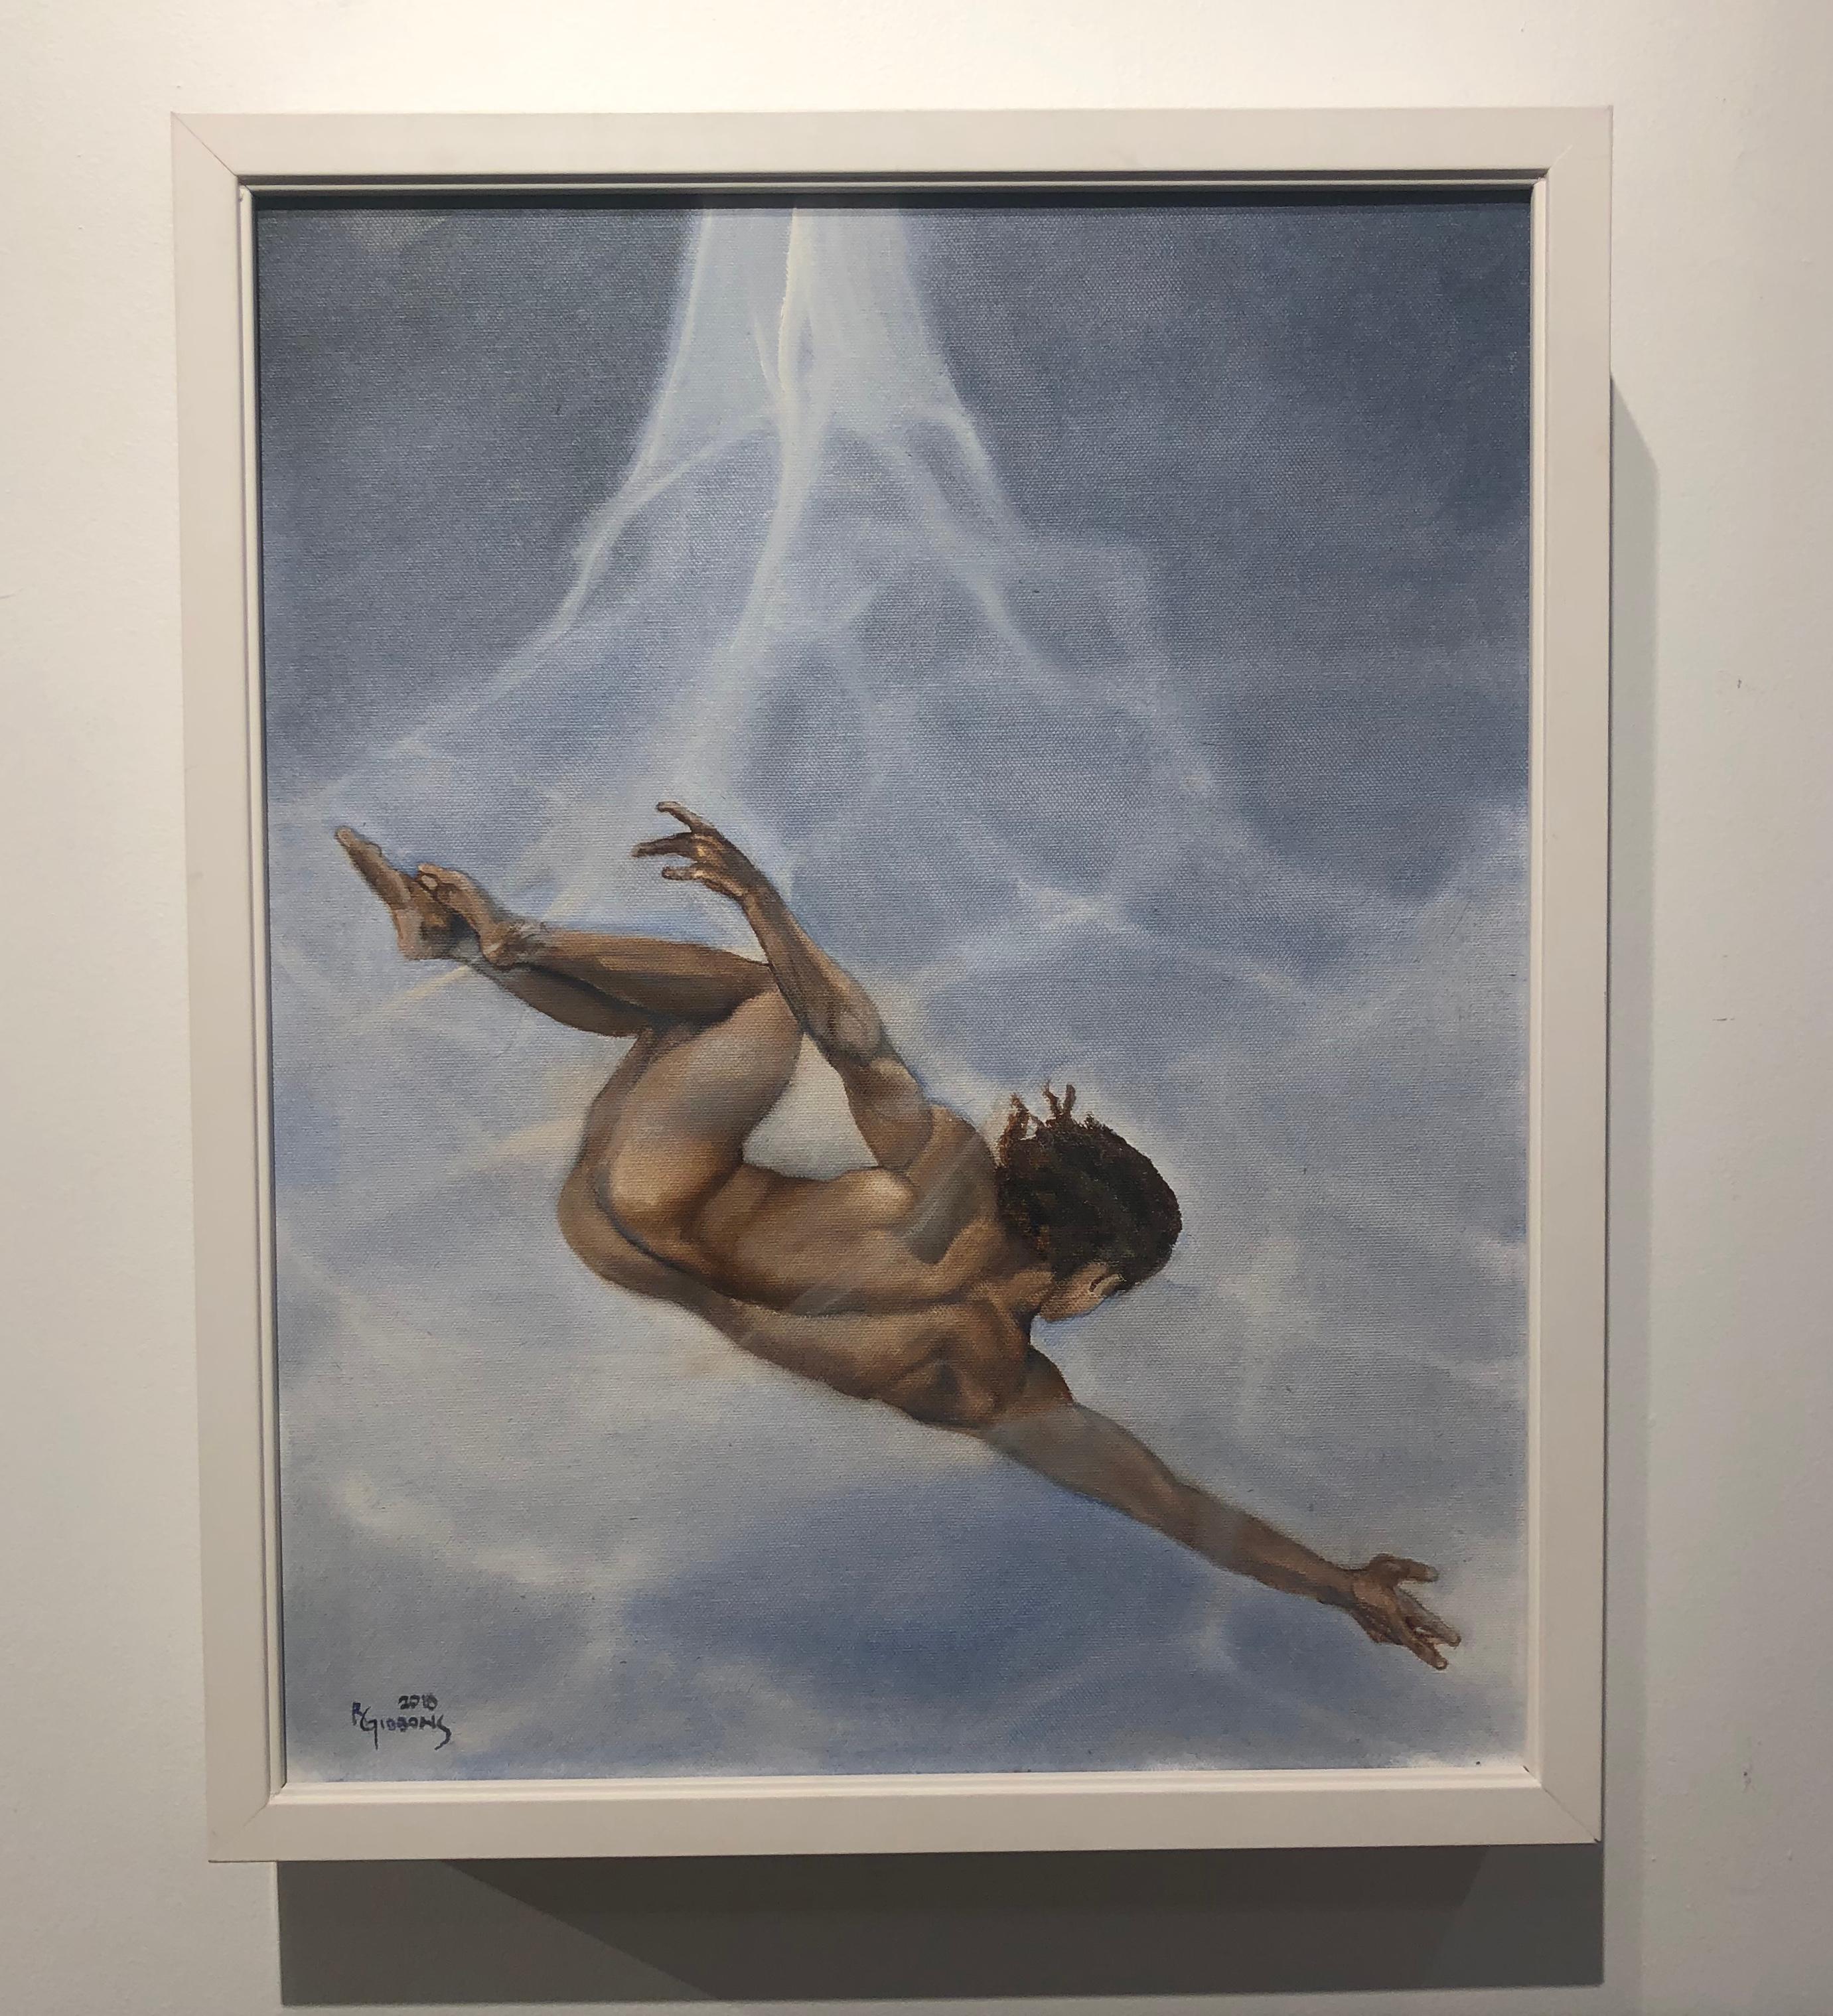 A male nude dives into crystal blue water in Richard Gibbons painting entitled 